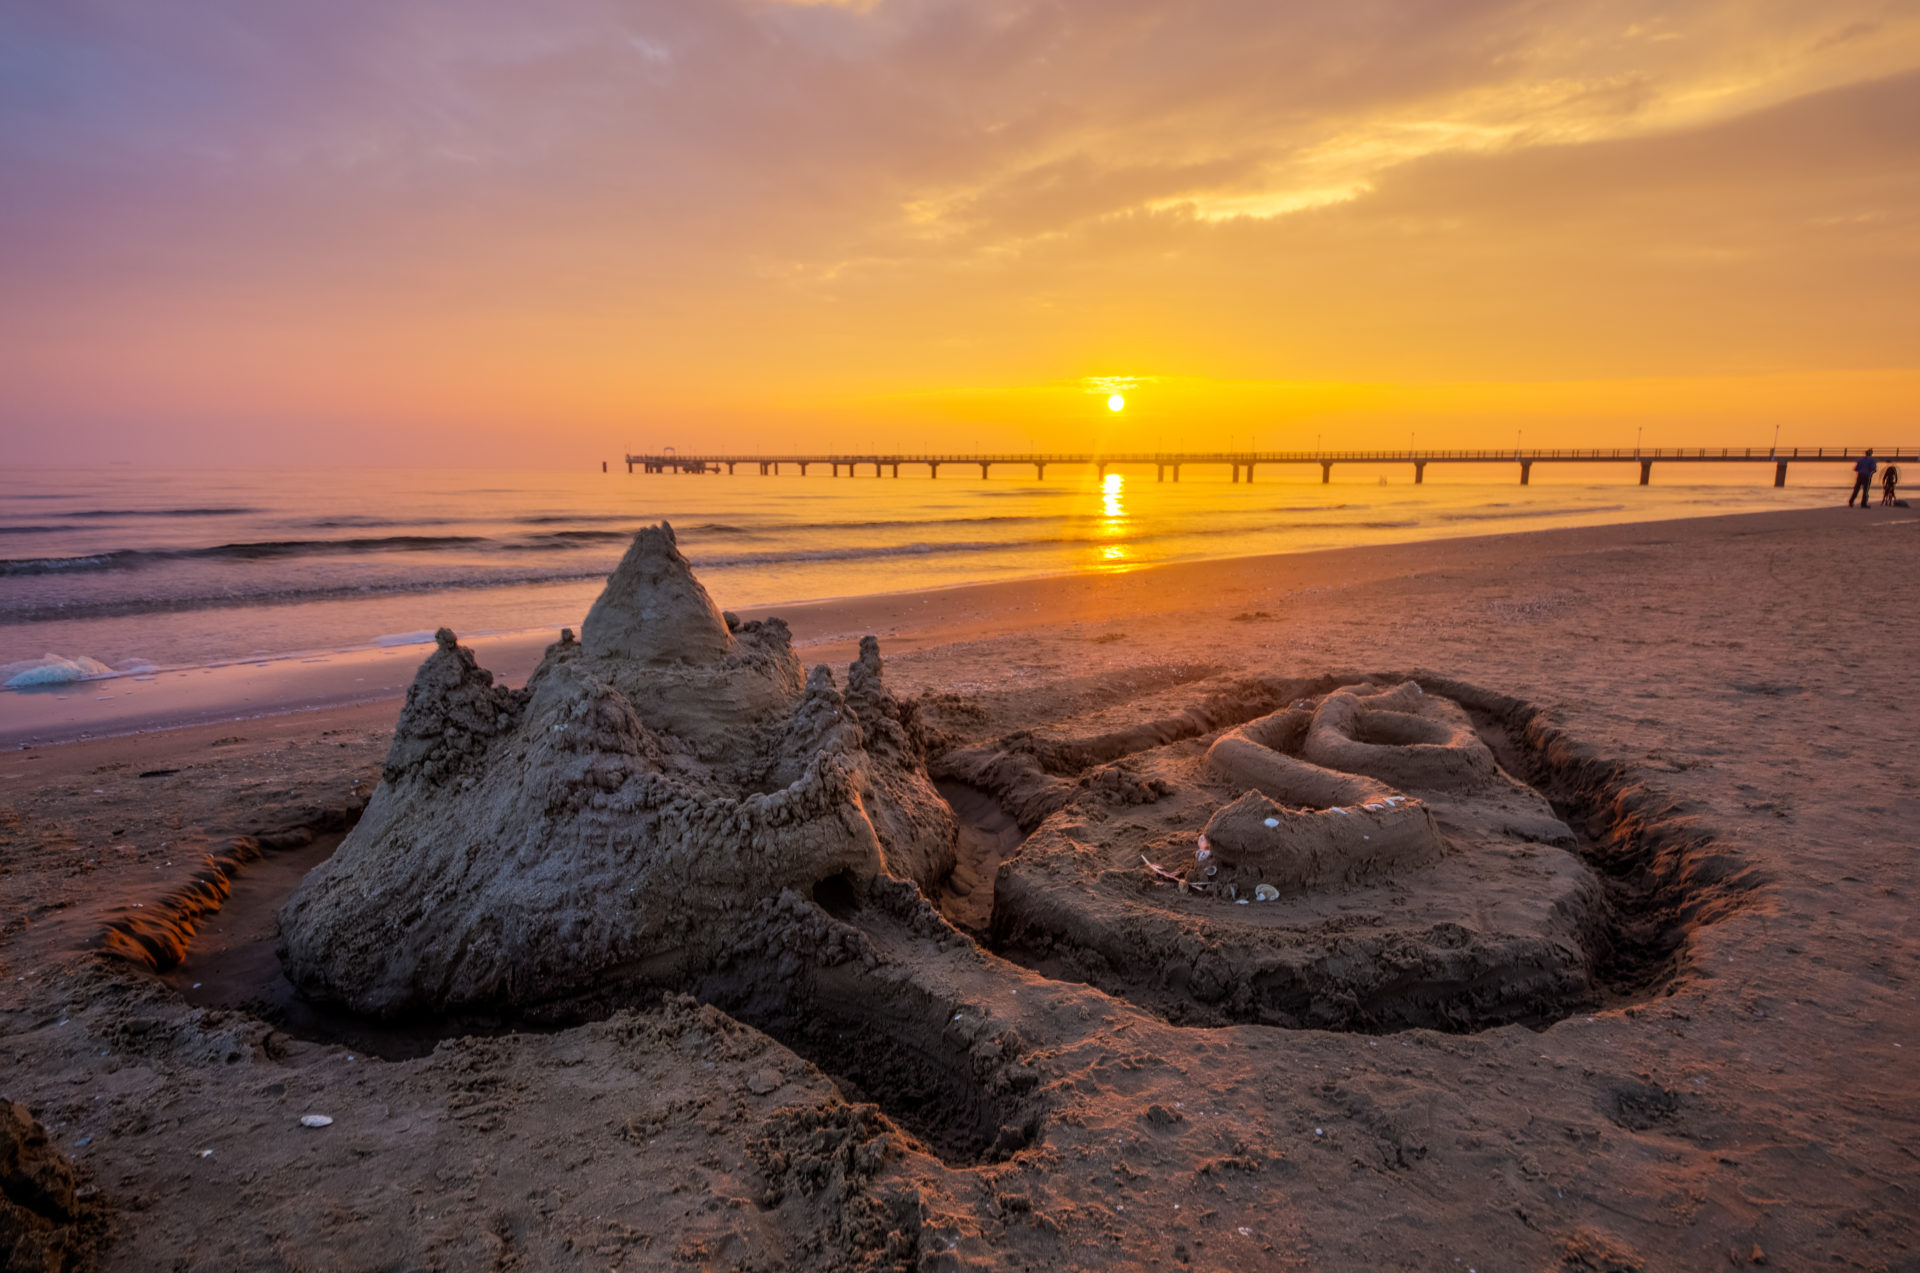 Bansin beach with a sandcastle at sunset | Imperial Baths Usedom